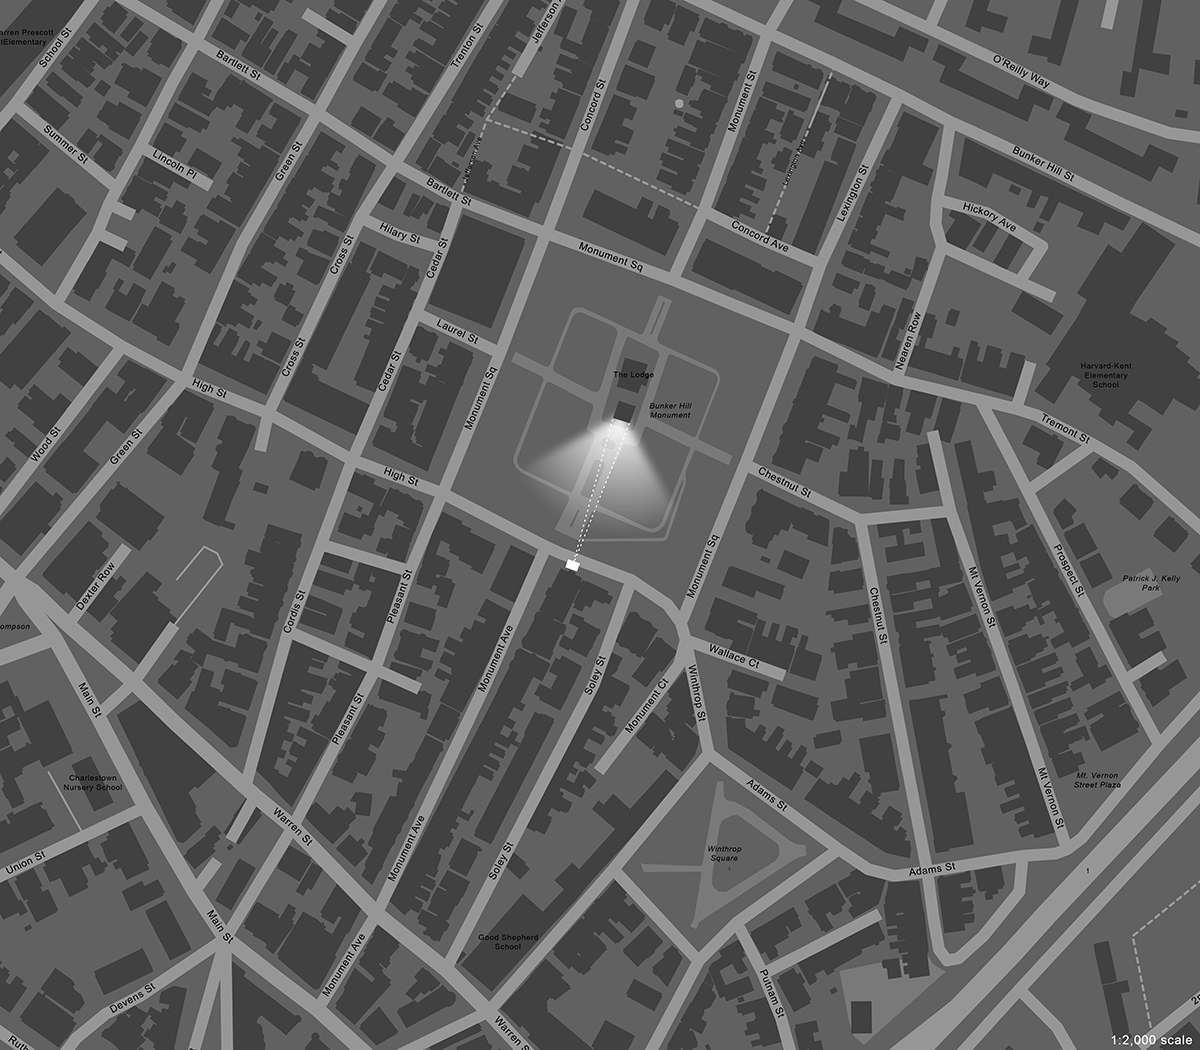 Aerial map of a section of Charlestown, Massachusetts showing Monument Square with the Bunker Hill Monument in the center. A highlighted area on the southern facade of the monument shows the location of the projection.